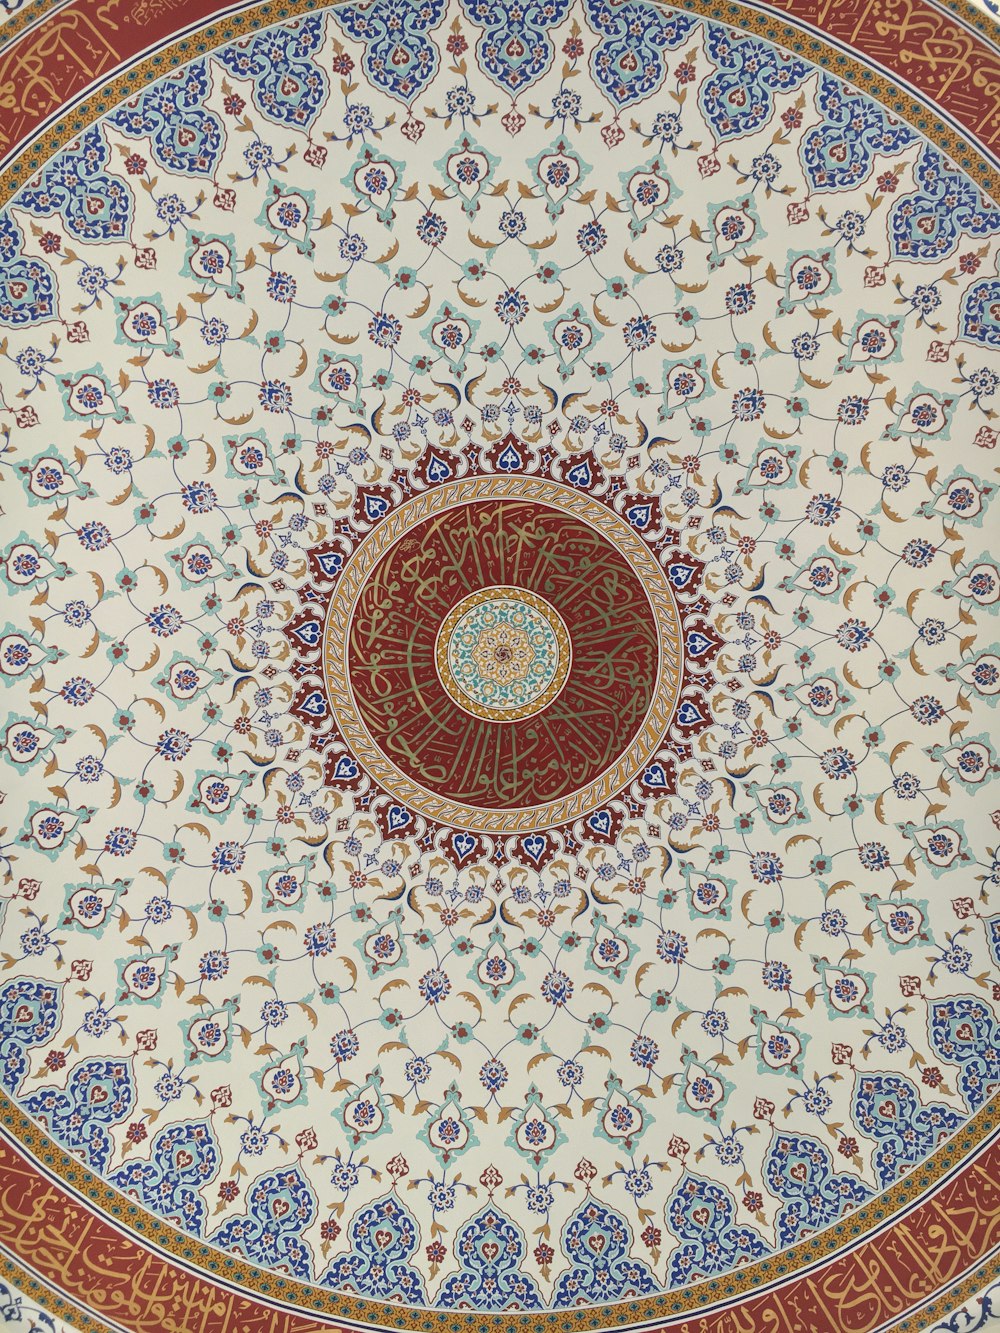 a decorative ceiling with a circular design on it